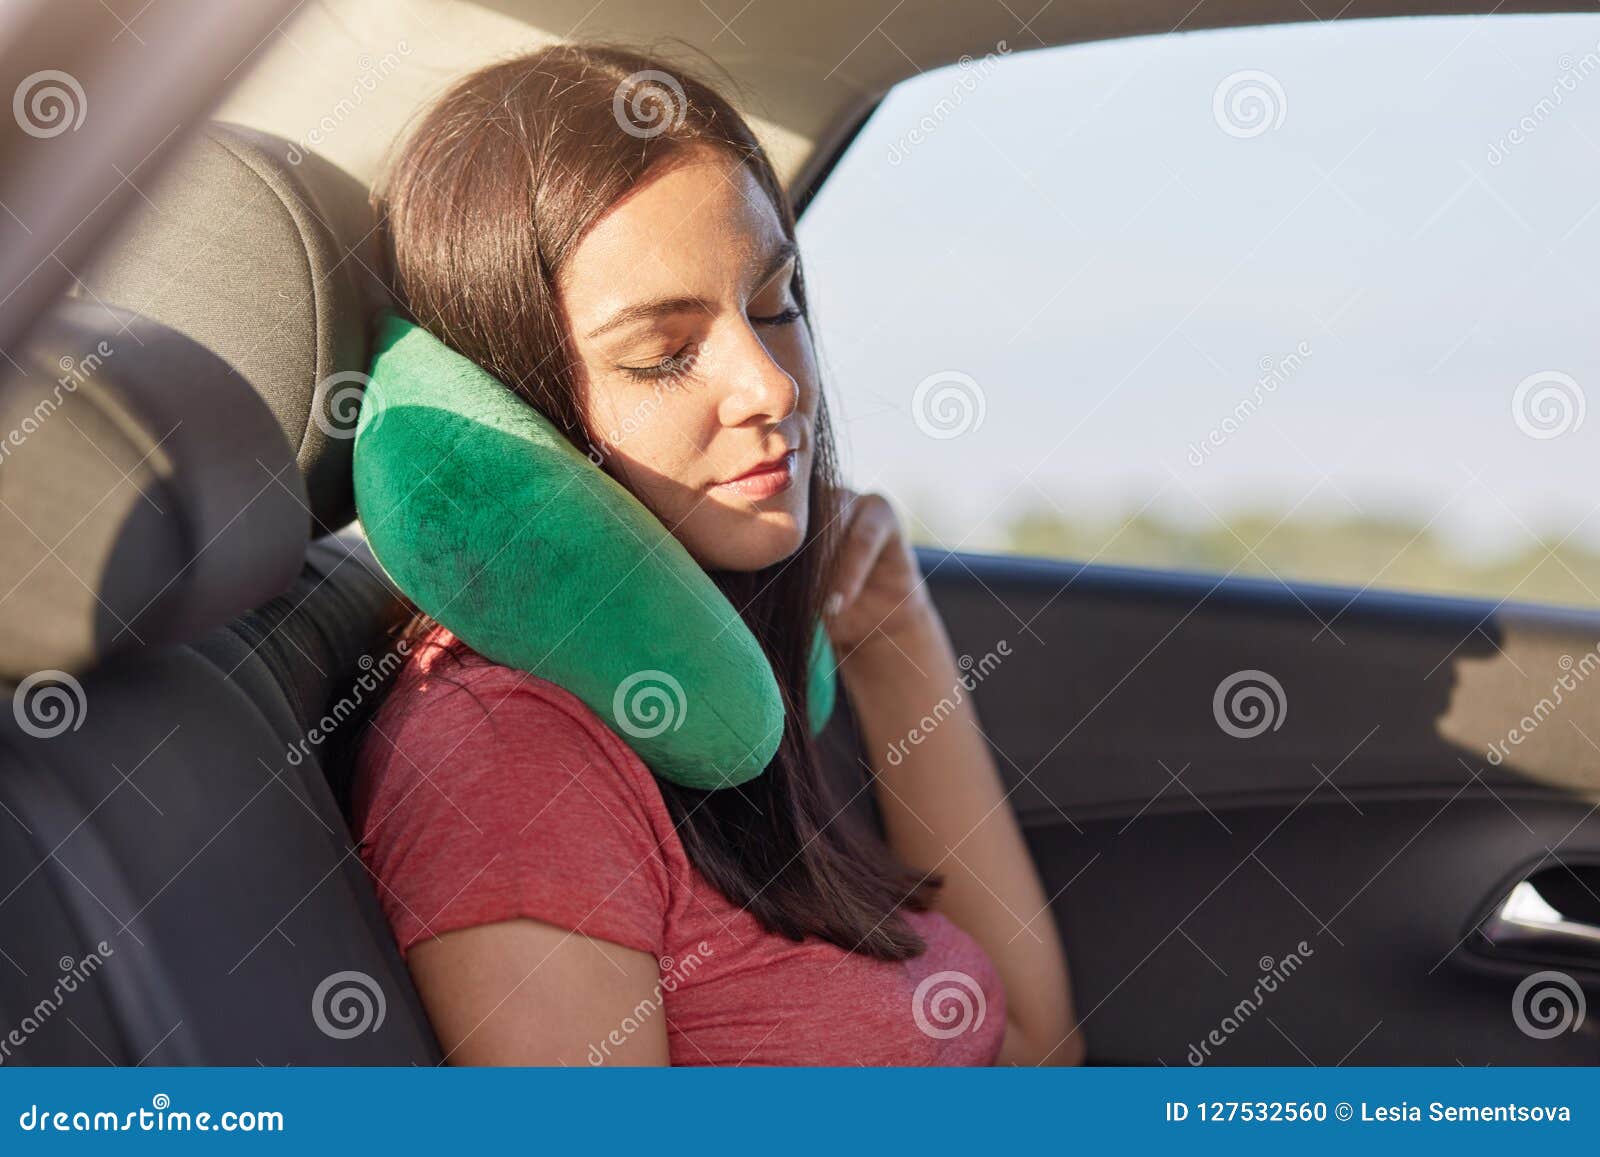 https://thumbs.dreamstime.com/z/female-passenger-sleeps-car-rides-long-distance-uses-small-pillow-as-has-pain-neck-takes-nap-rest-feels-tir-tired-127532560.jpg